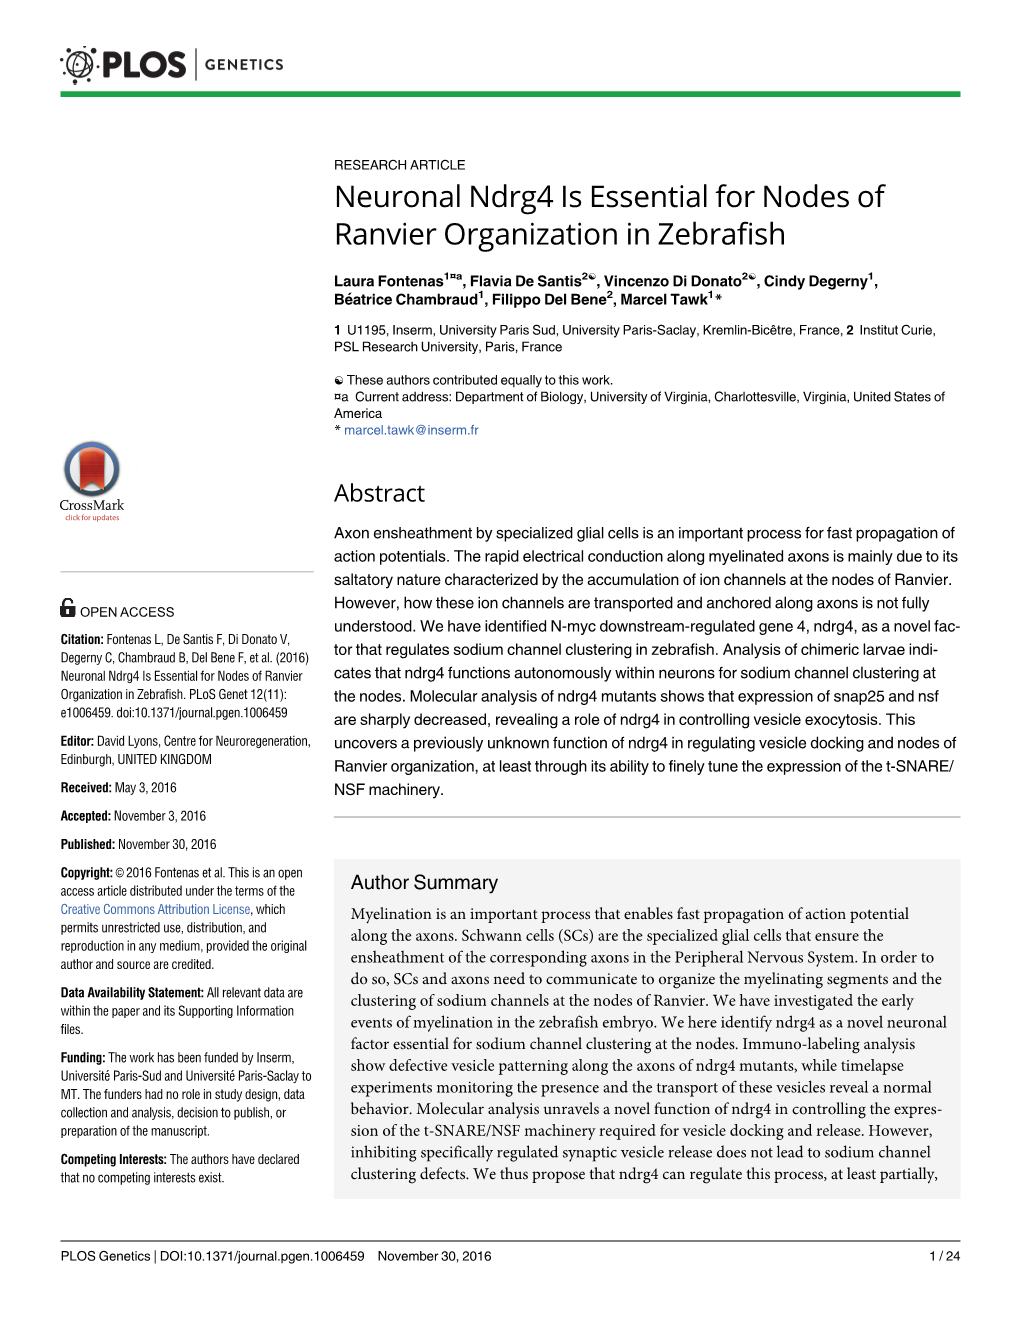 Neuronal Ndrg4 Is Essential for Nodes of Ranvier Organization in Zebrafish